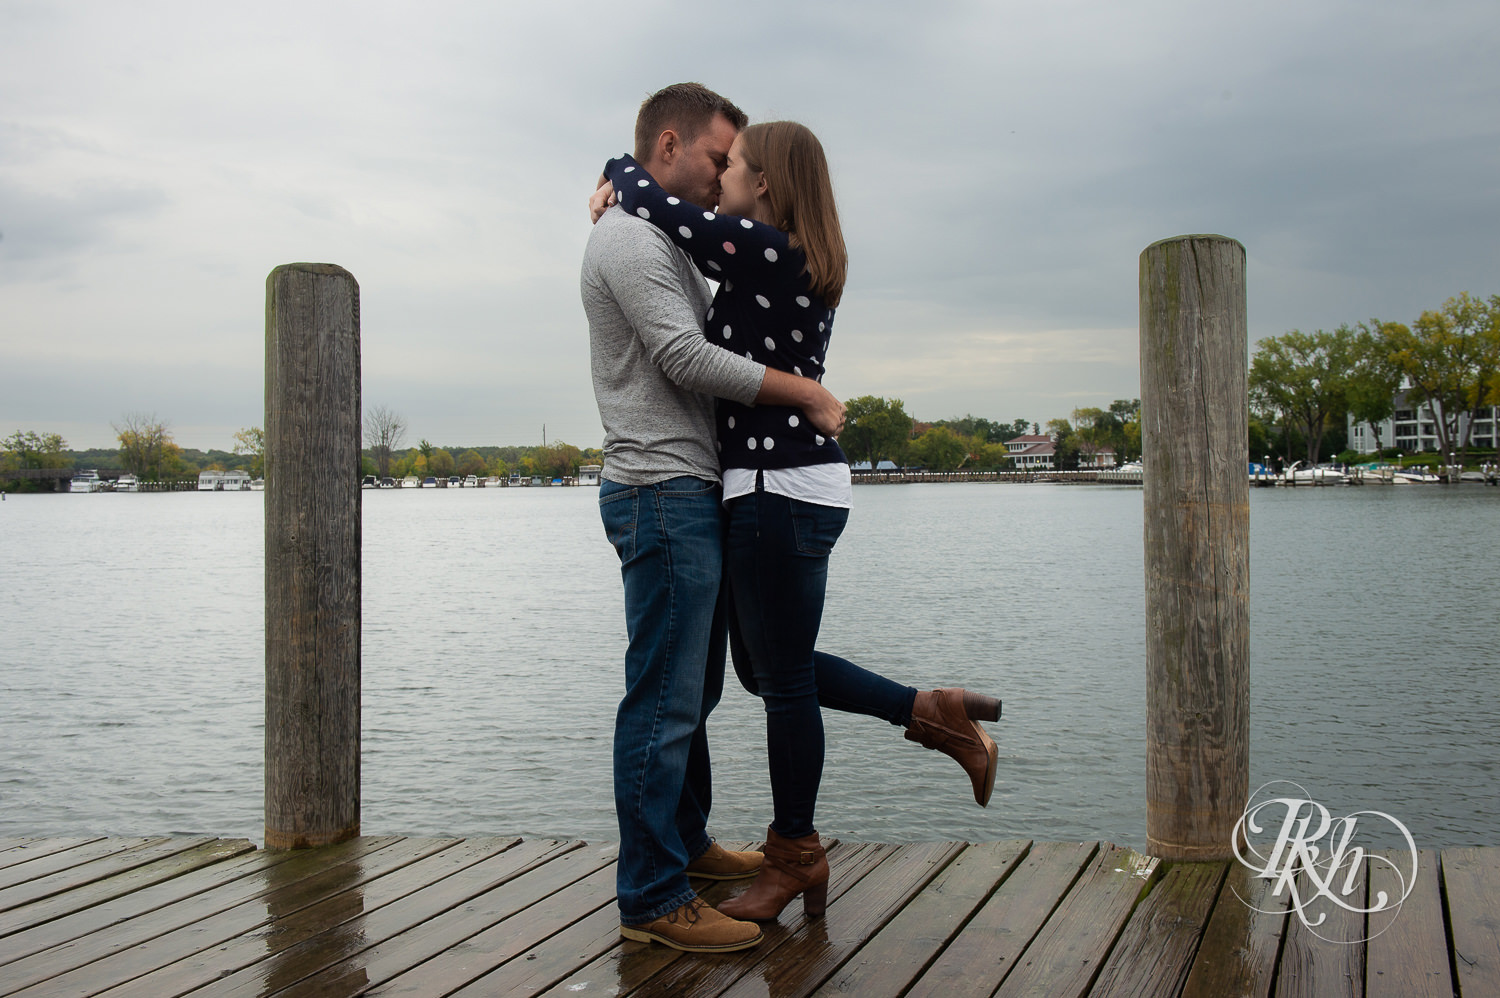 Man and woman in sweaters and jeans kiss during rainy day engagement photos in Excelsior, Minnesota.